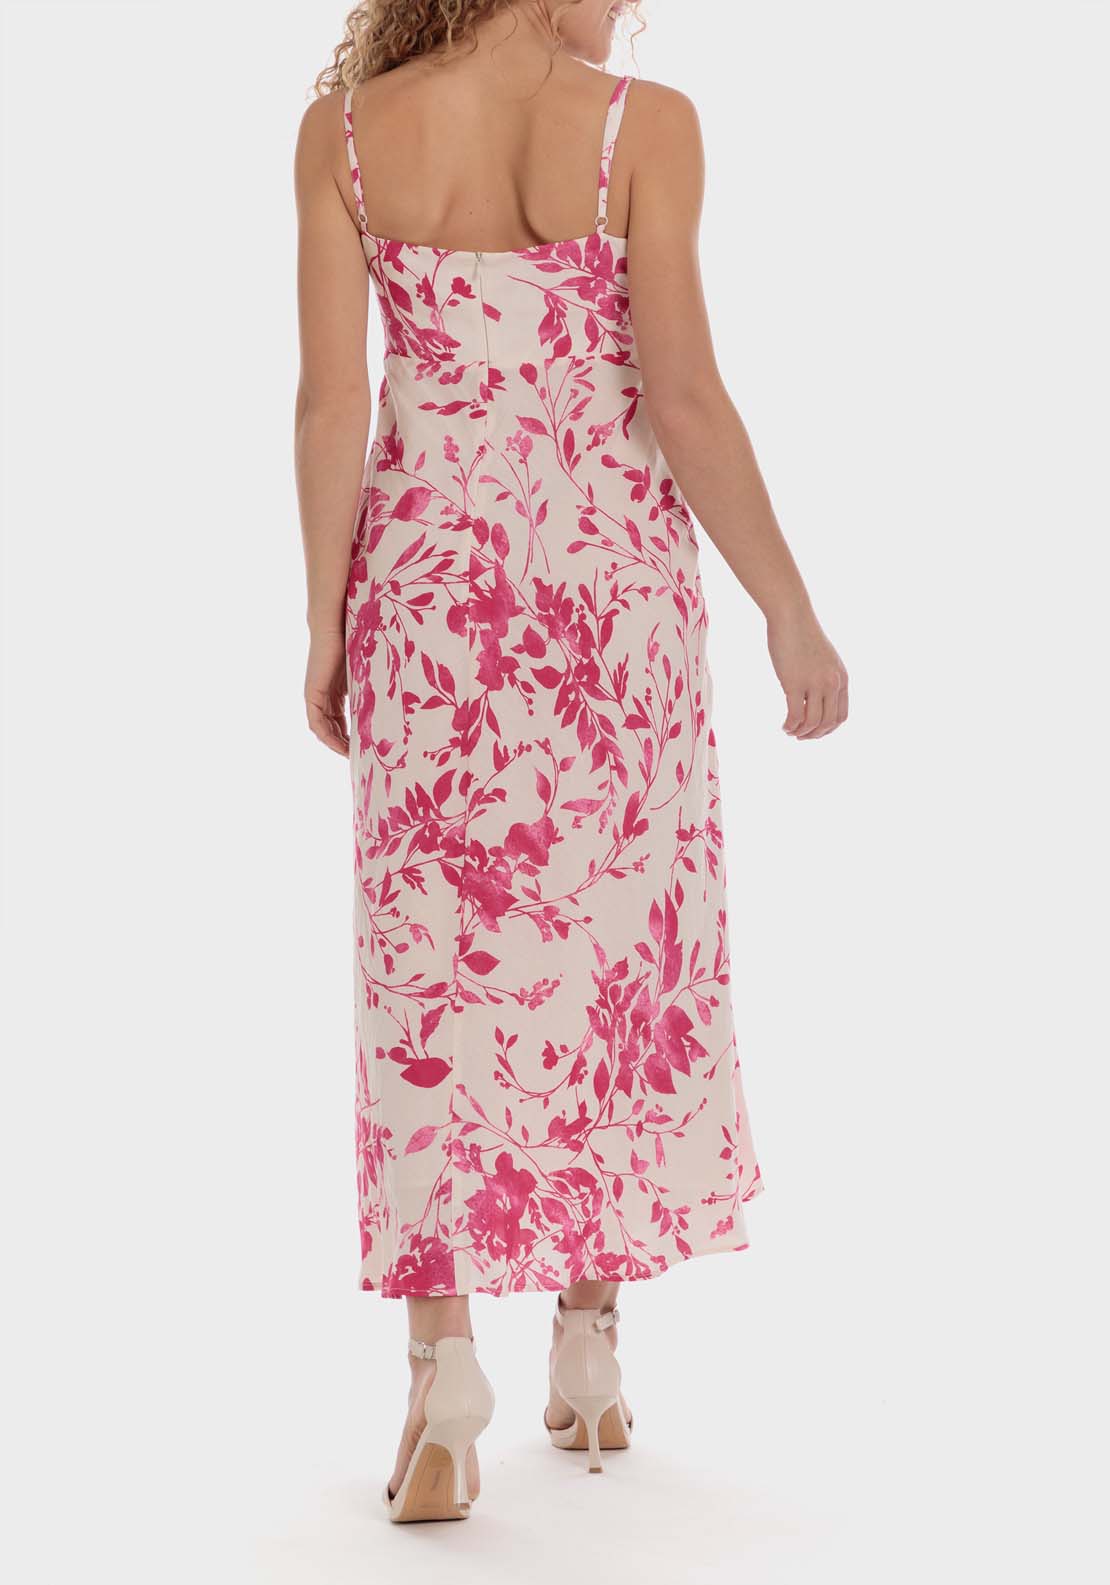 Punt Roma Printed Linen Dress 3 Shaws Department Stores